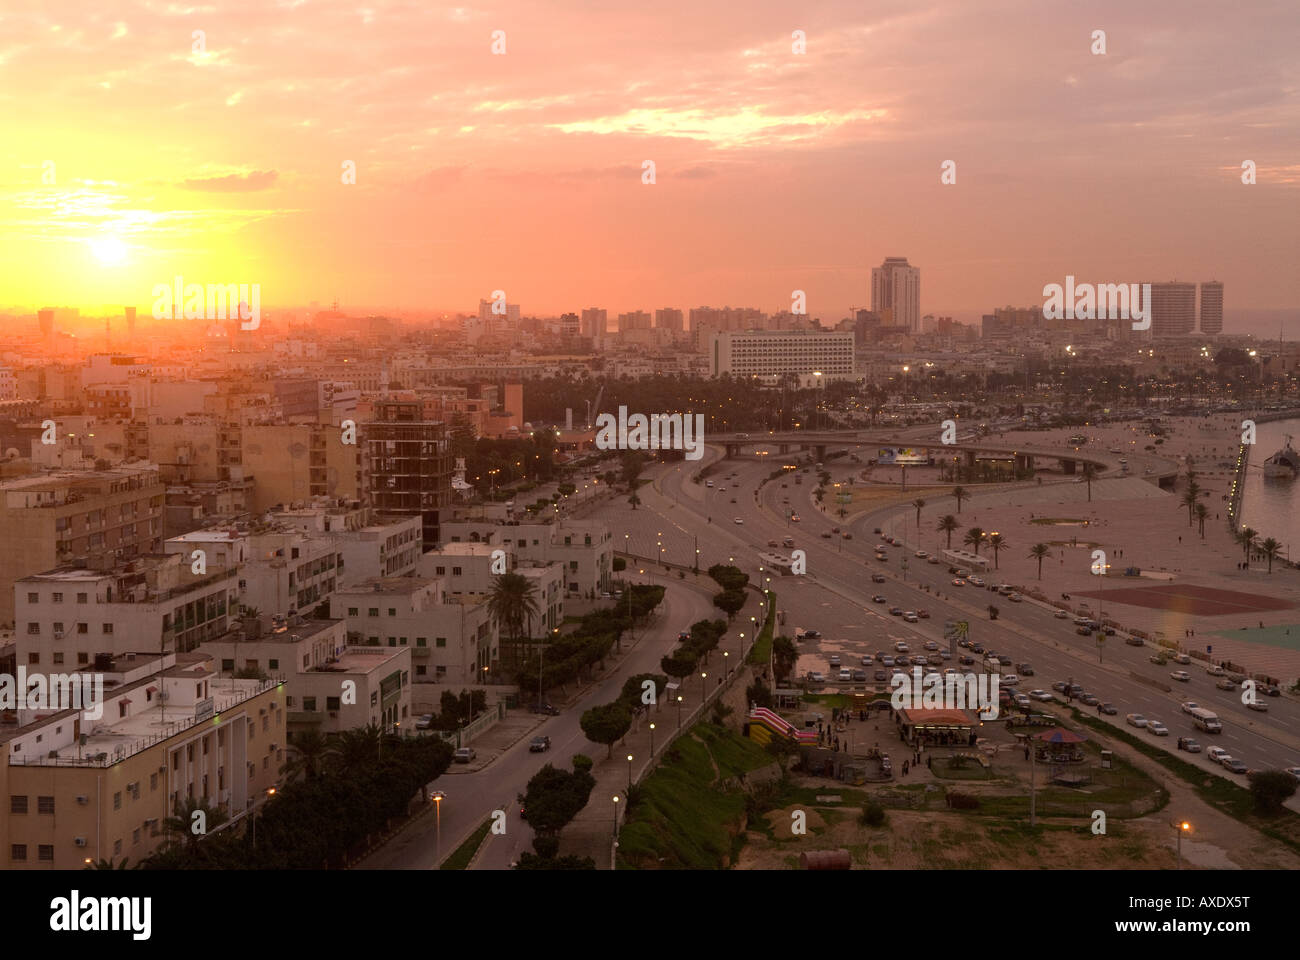 General view over the city of Tripoli, Libya, north Africa. Stock Photo